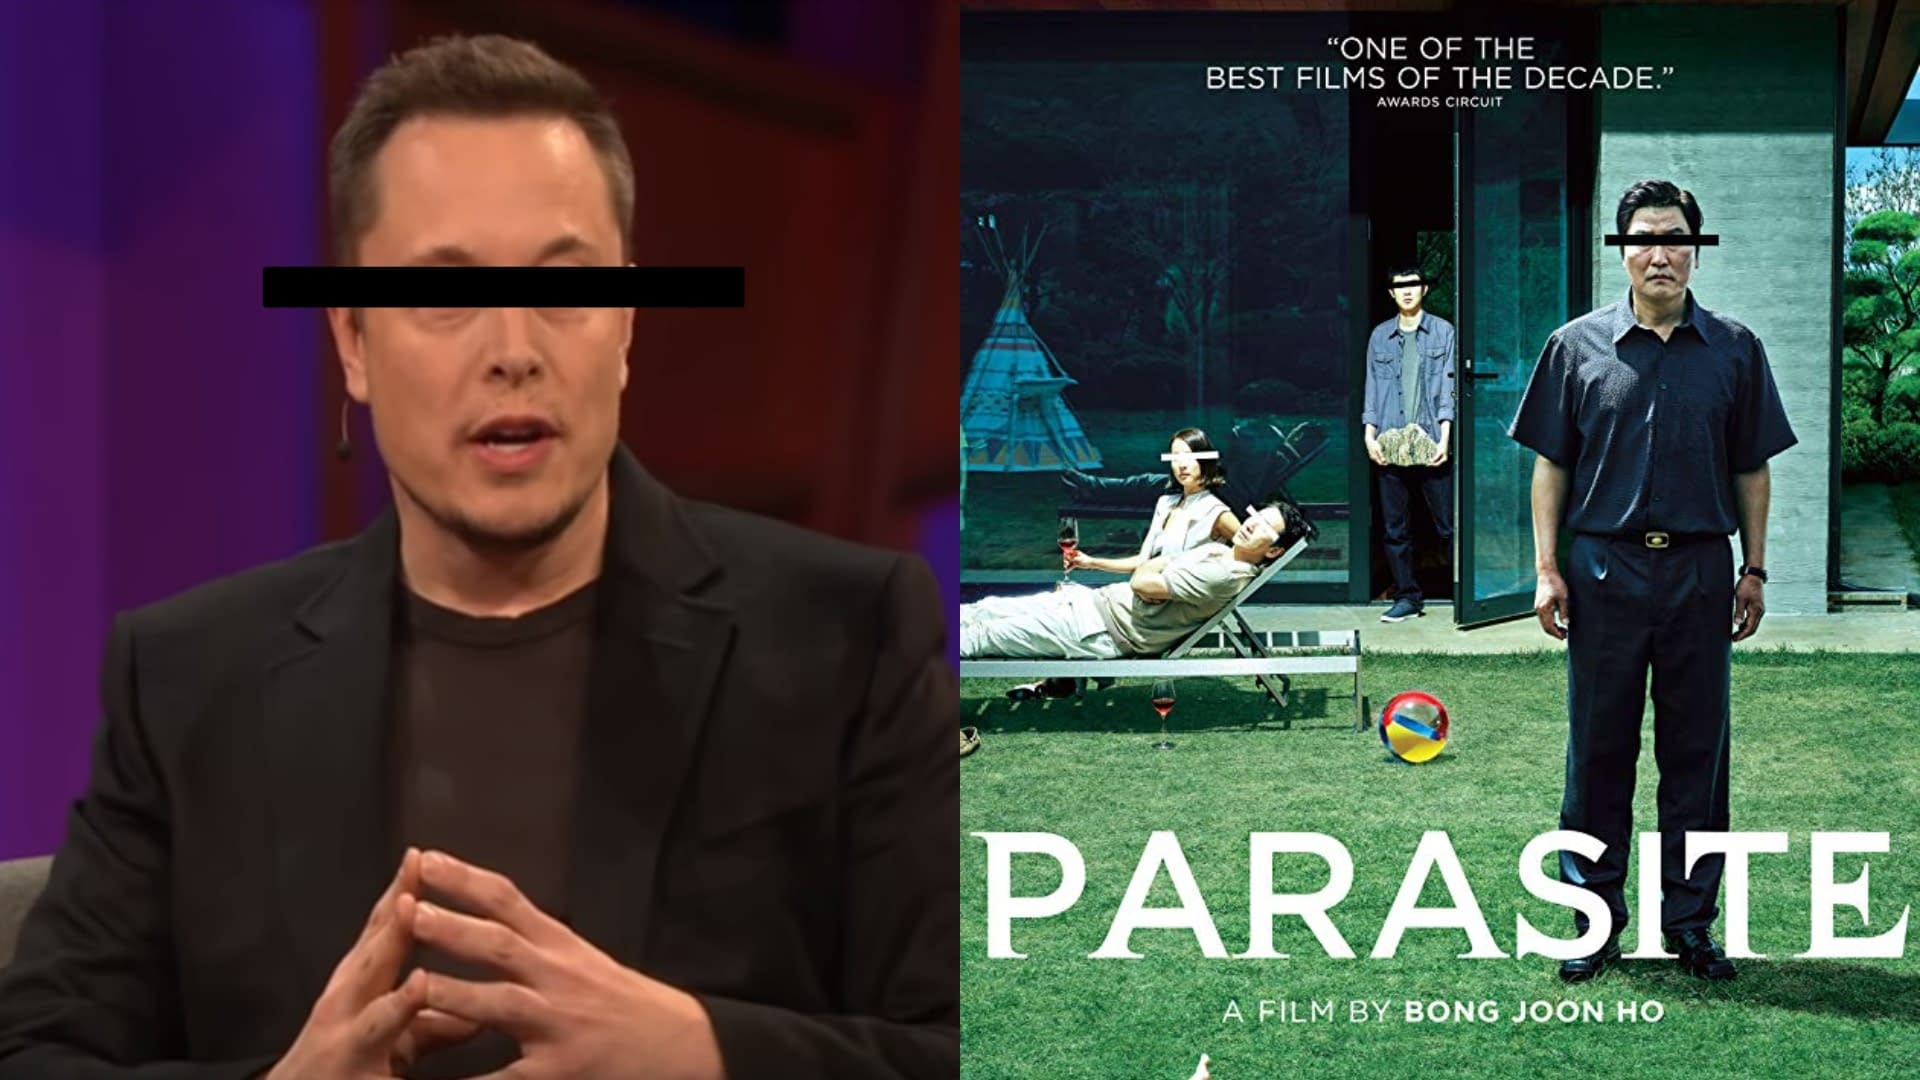 Elon Musk Says His Favorite Movie of 2019 Was "Parasite" And The